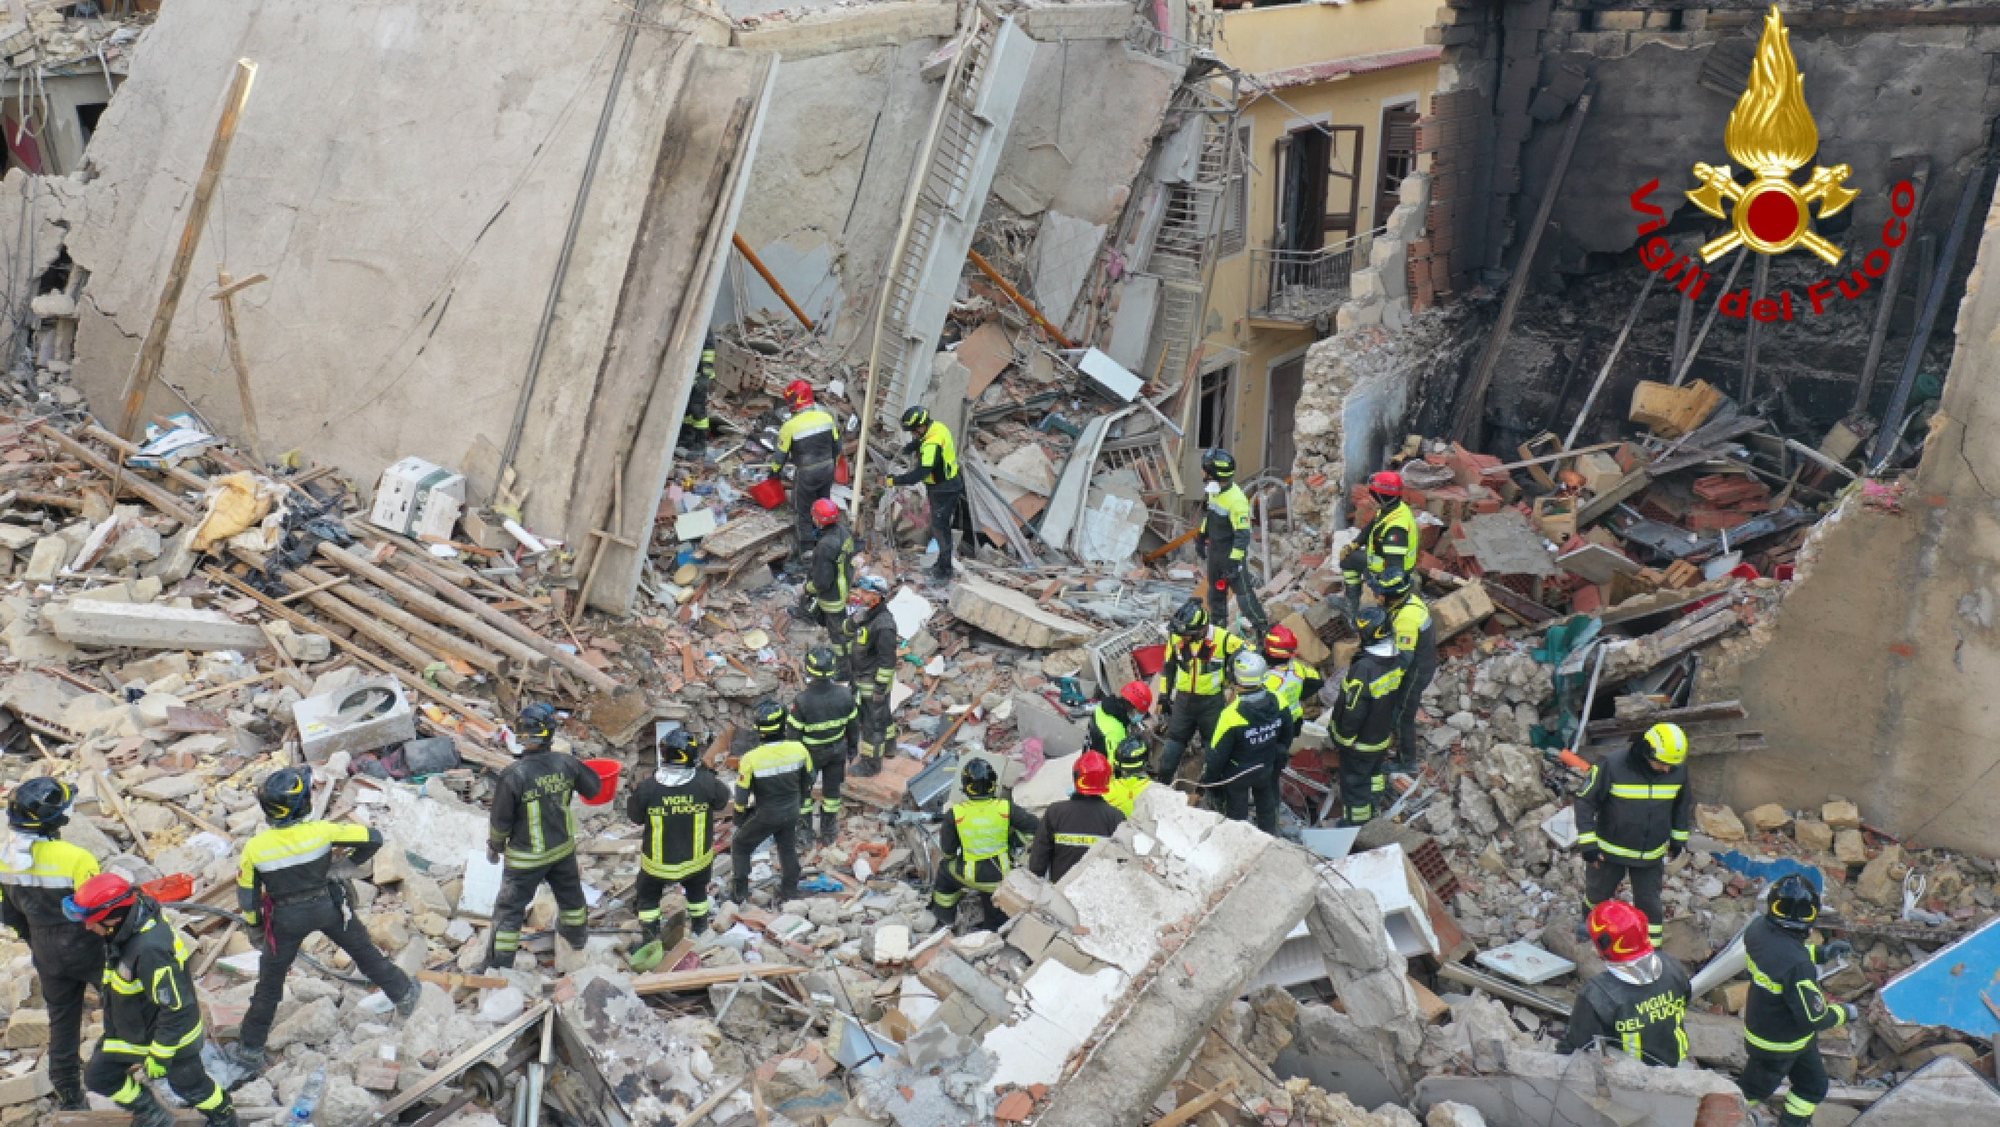 epa09637934 A handout picture provided by the Vigili del Fuoco shows an aerial view of the damage following a blast caused by a gas leak in Ravanusa, Sicily, Italy, 12 December 2021. Firefighters found a fourth body in the rubble of the collapsed buildings; two survivors were rescued, five people are still missing.  EPA/VIGILI DEL FUOCO HANDOUT  HANDOUT EDITORIAL USE ONLY/NO SALES